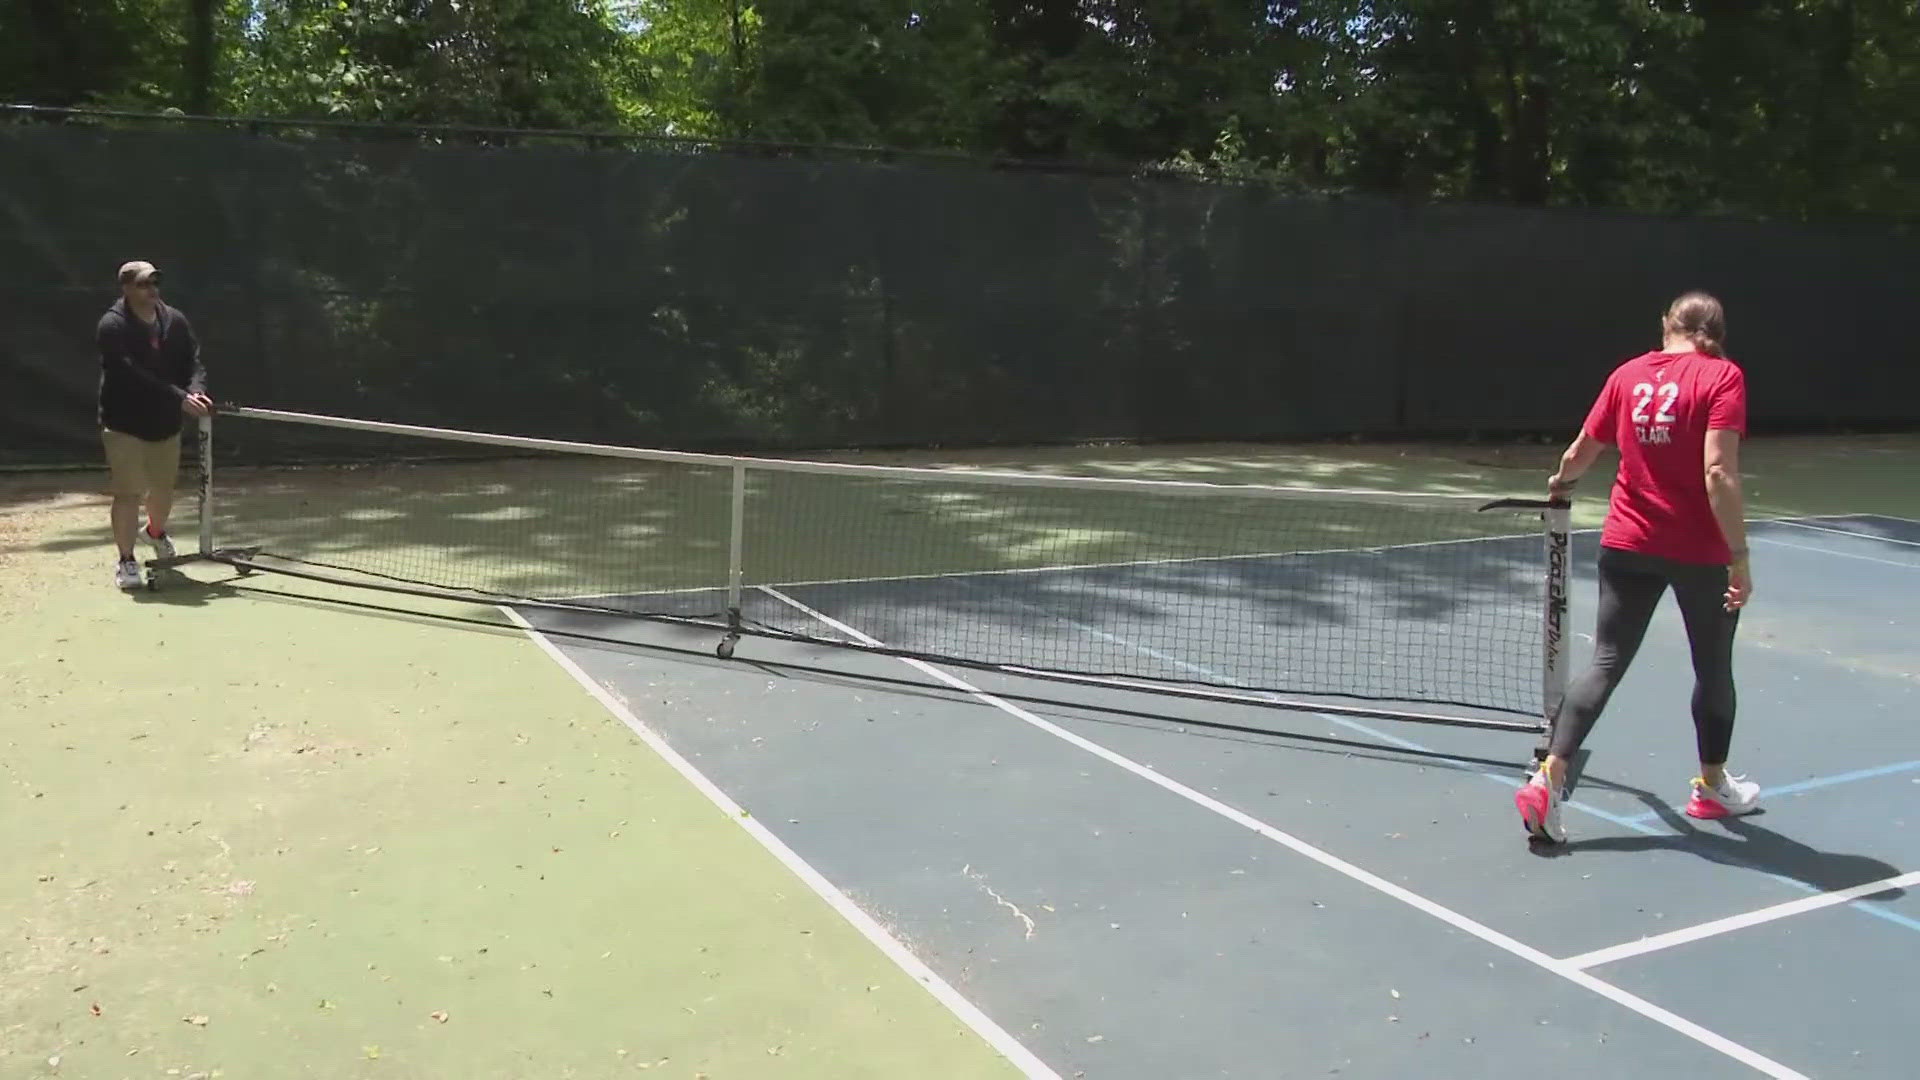 The Fairfax County Park Authority announced plans to restripe the courts at park to tennis only due to noise complaints.